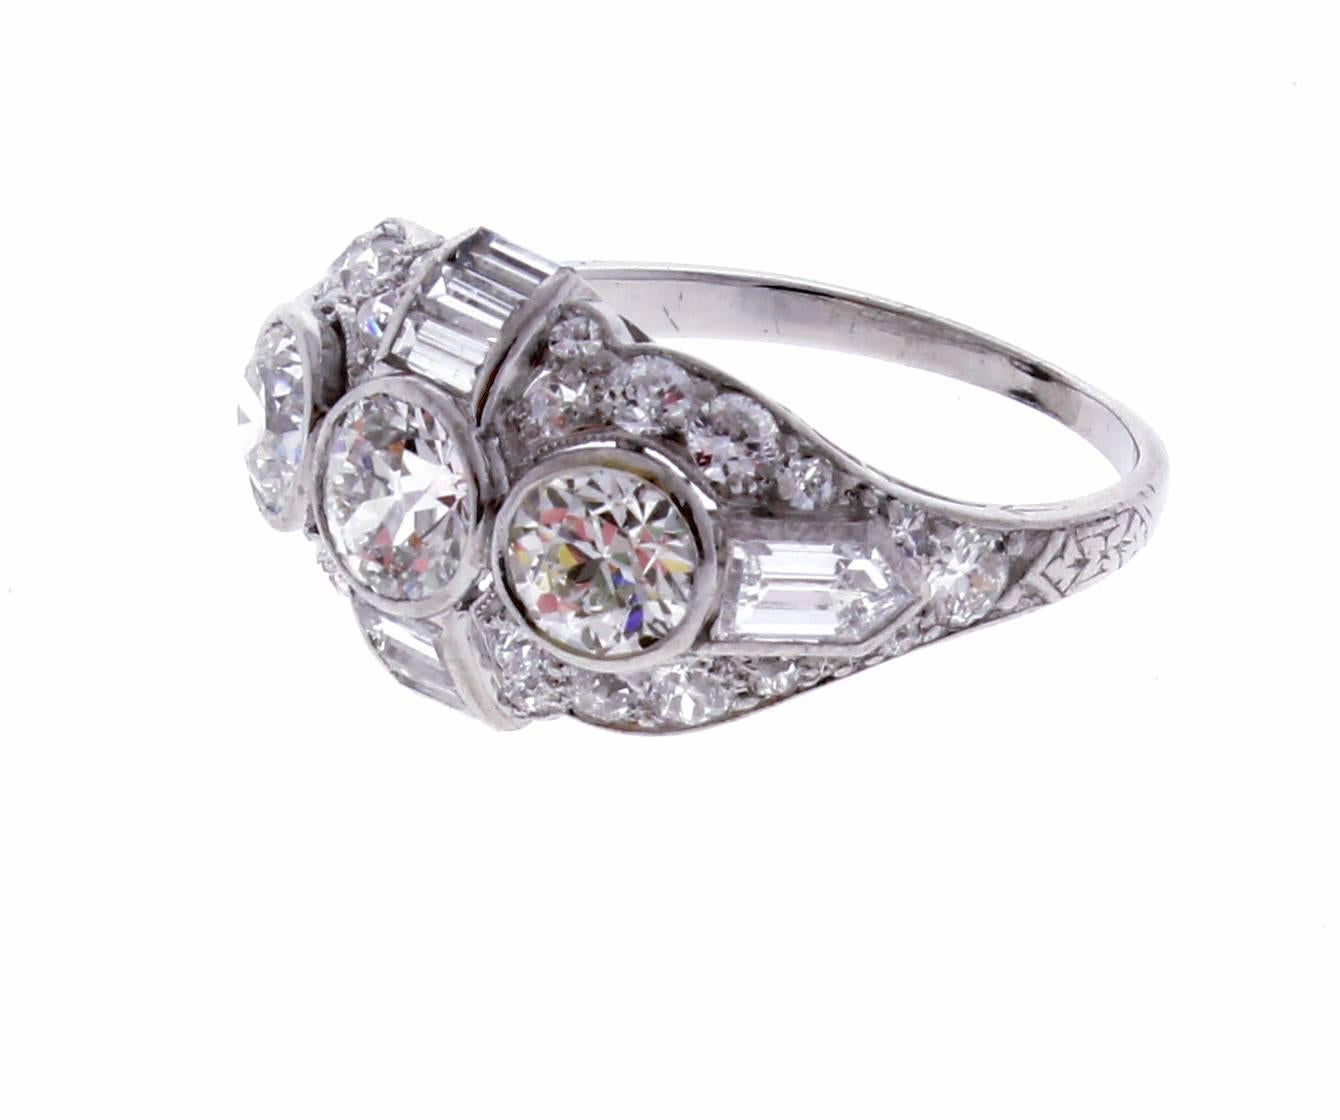 From the Belle Époque era, this well appointed three diamond ring .The handmade platinum ring features 3 old Europe cut diamonds weighing approximately 1.30 carats. The diamonds are H color and VS clarity.  The additional diamonds weigh